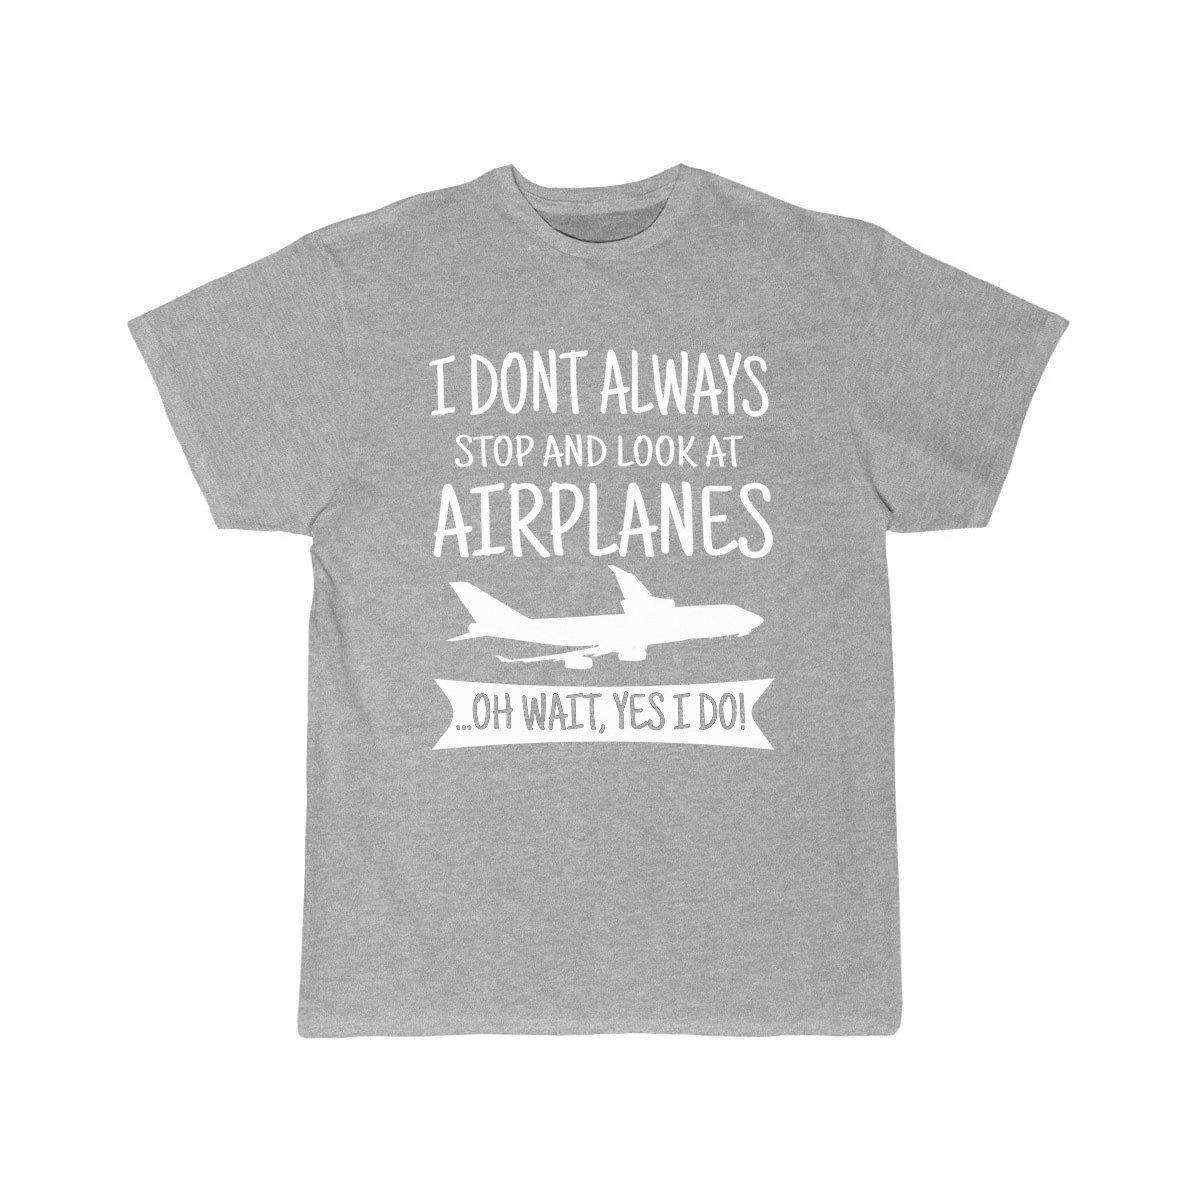 I DON'T ALWAYS STOP AND LOOK AT AIRPLANES,YES I DO T-SHIRT T SHIRT THE AV8R